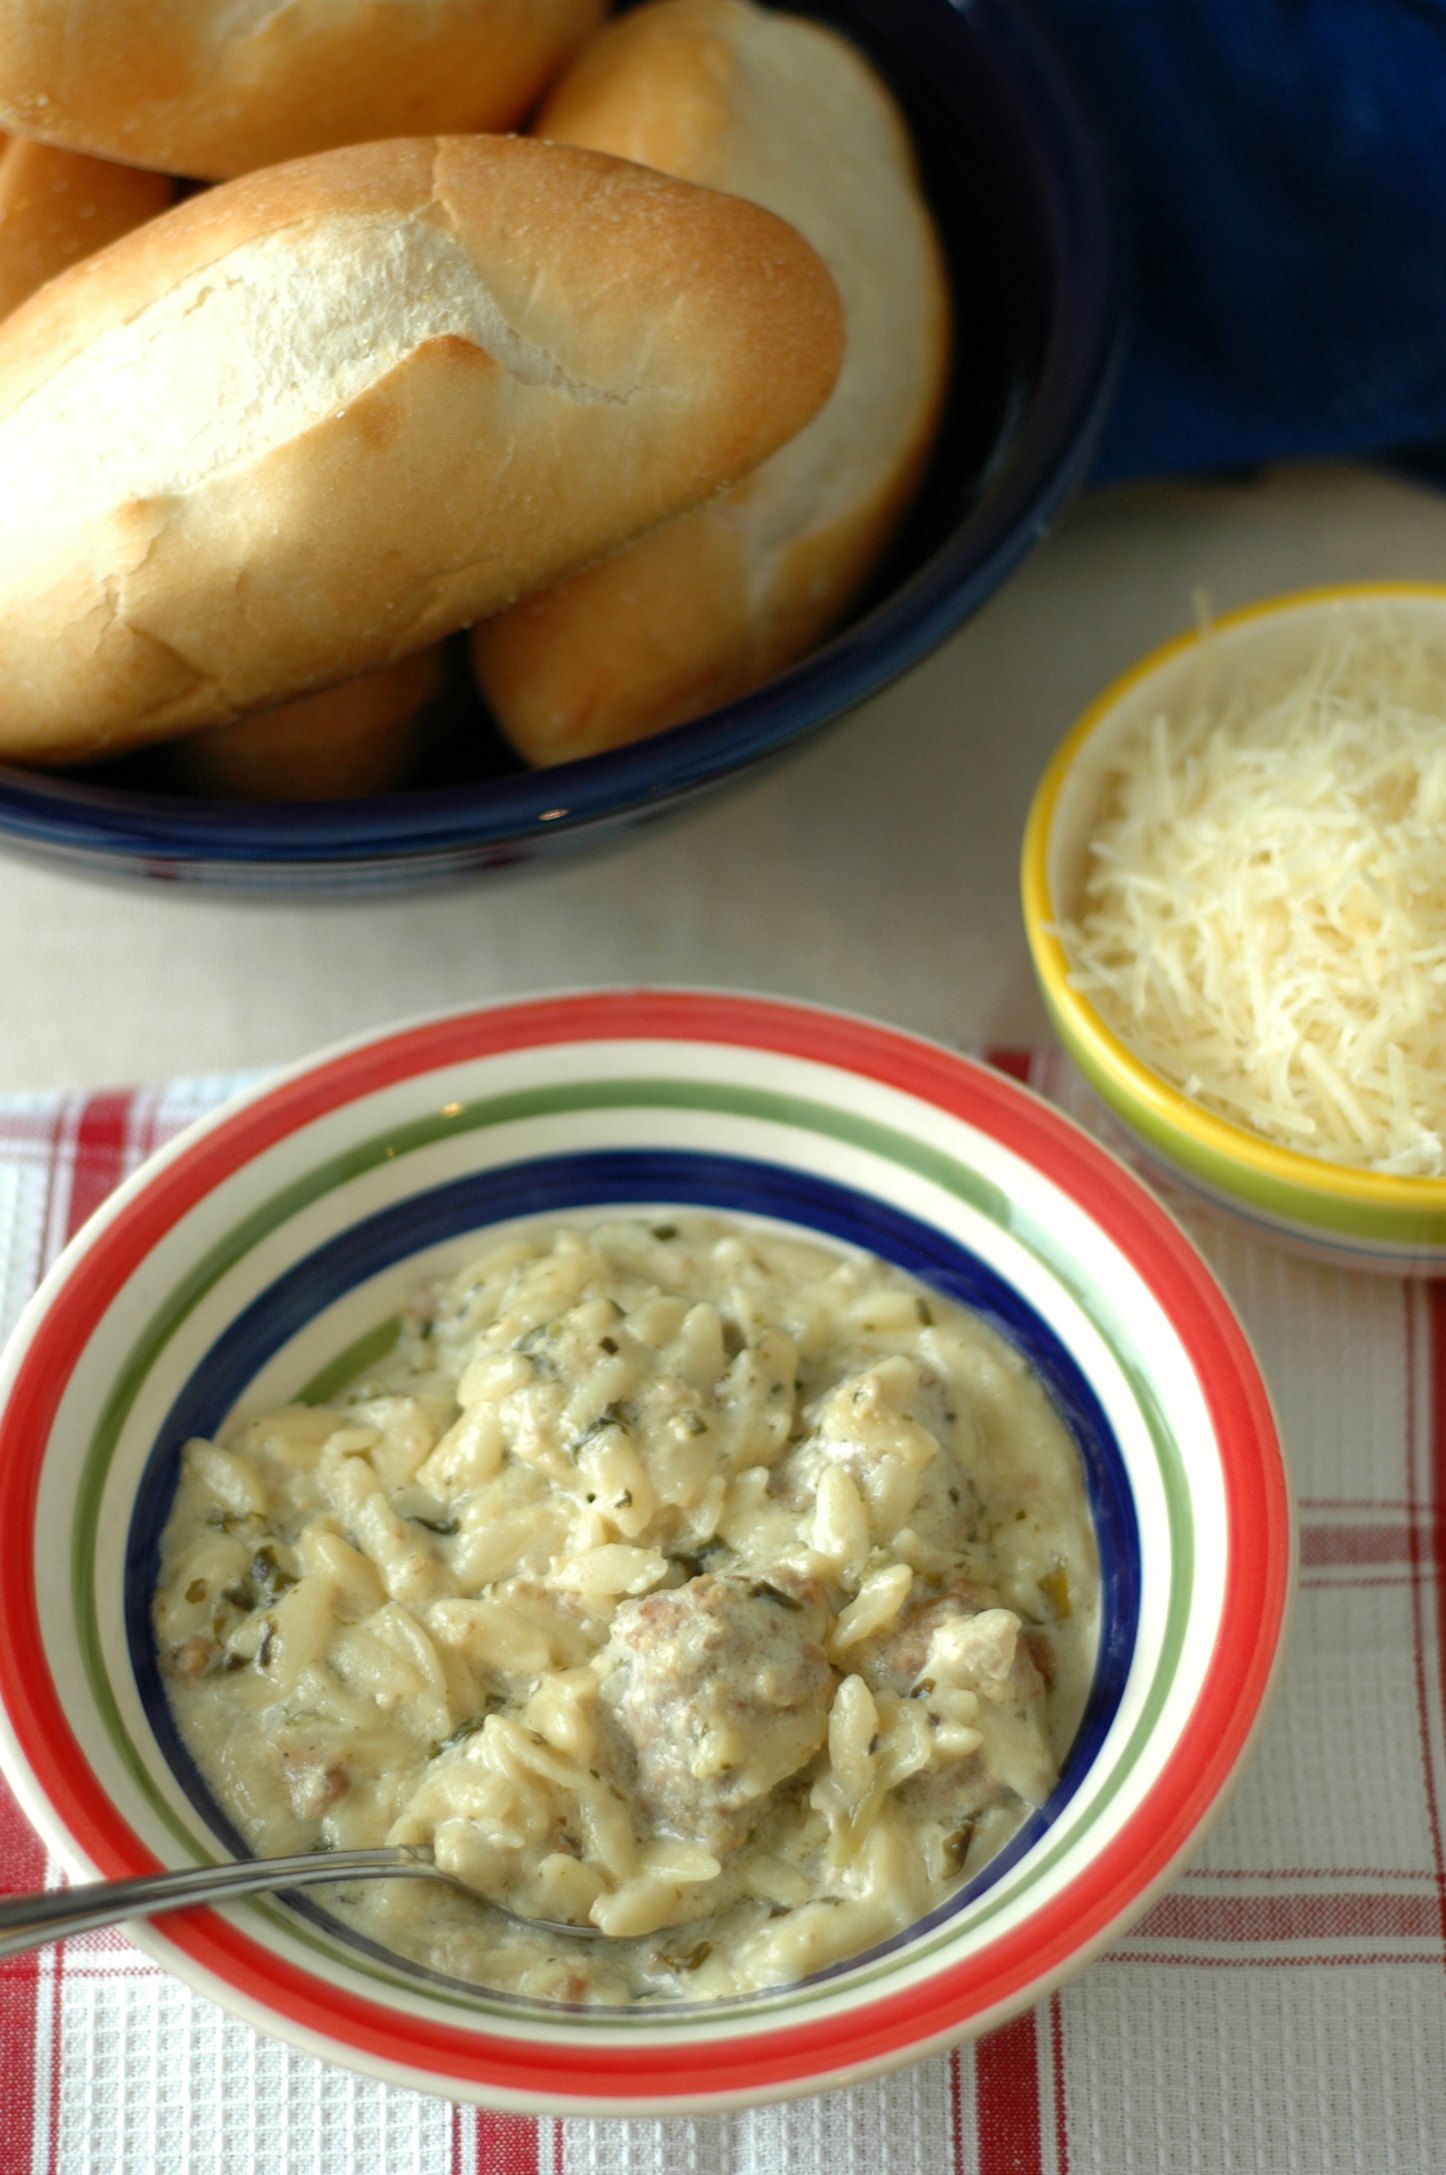 White bowl with colored rim of Creamy Meatball and Orzo Soup, baked roll and shredded cheese